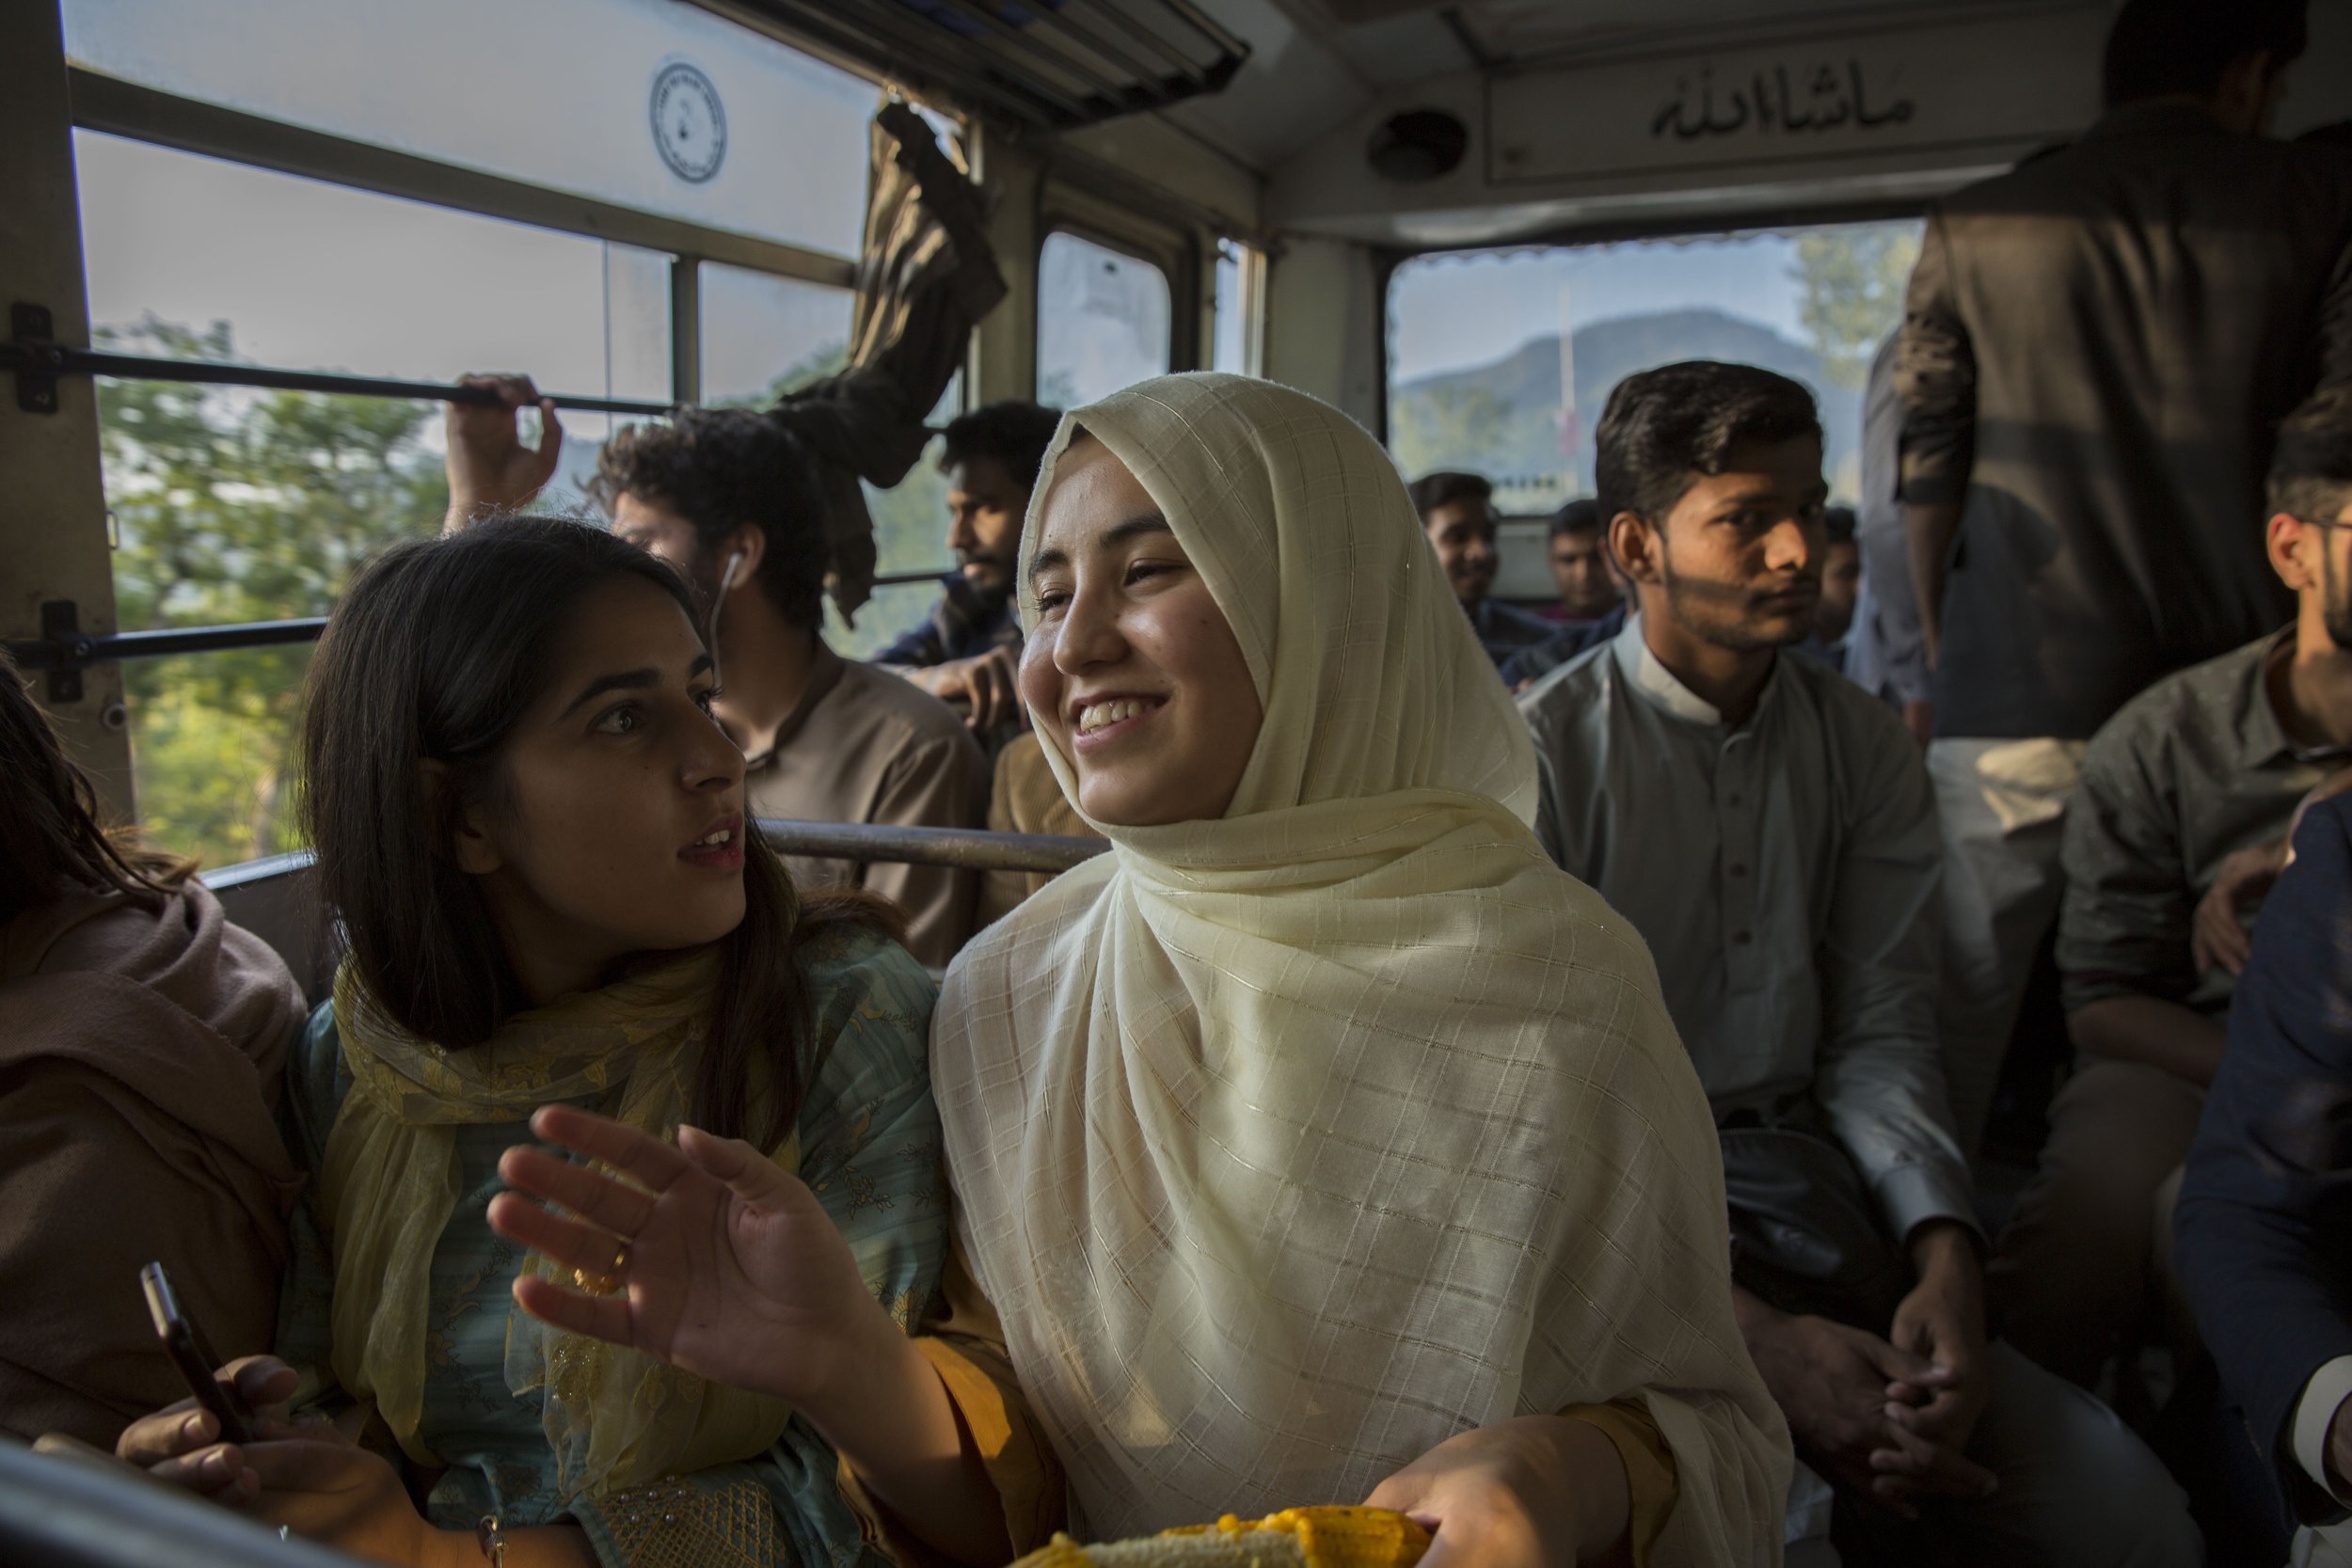  Bibi takes a bus with fellow university students to a mall. The outing would have been rare back in Quetta. 